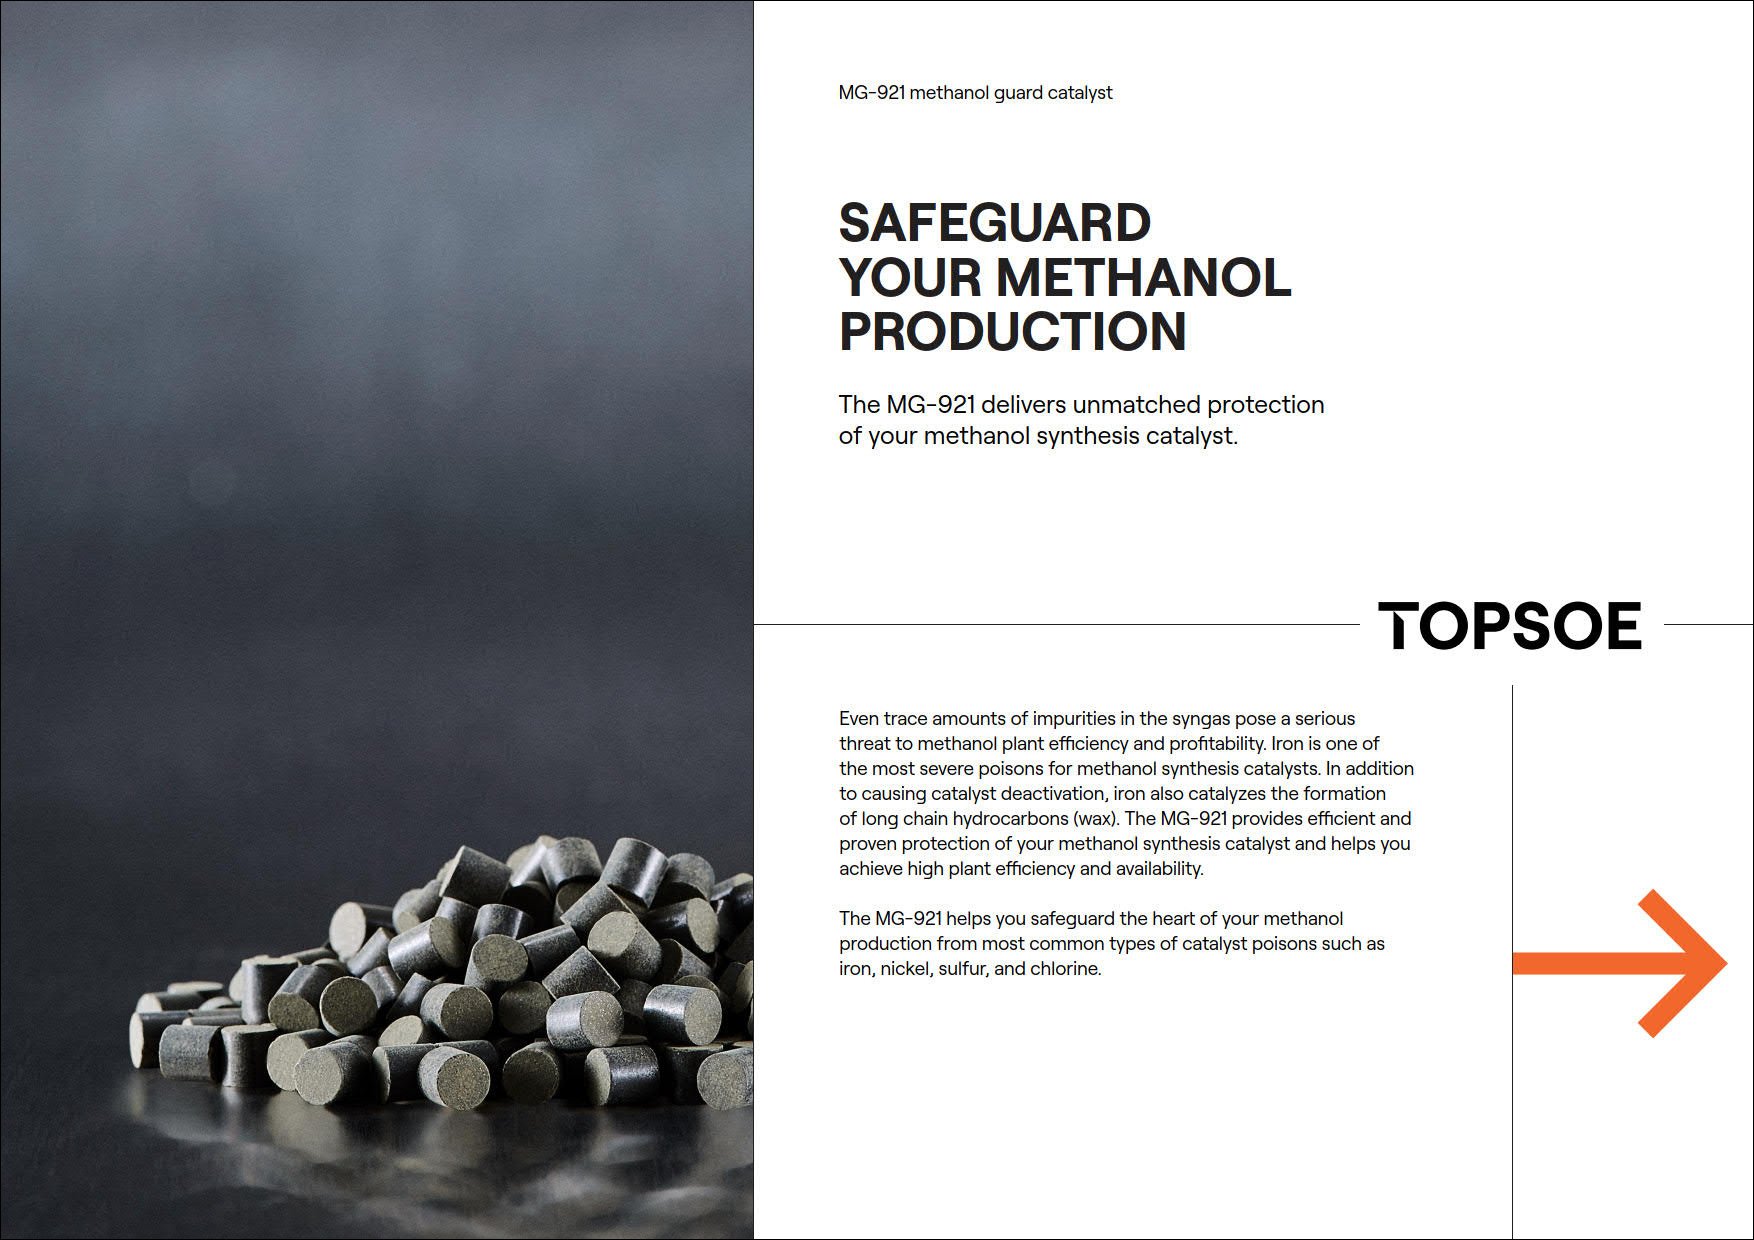 Safeguard your methanol production